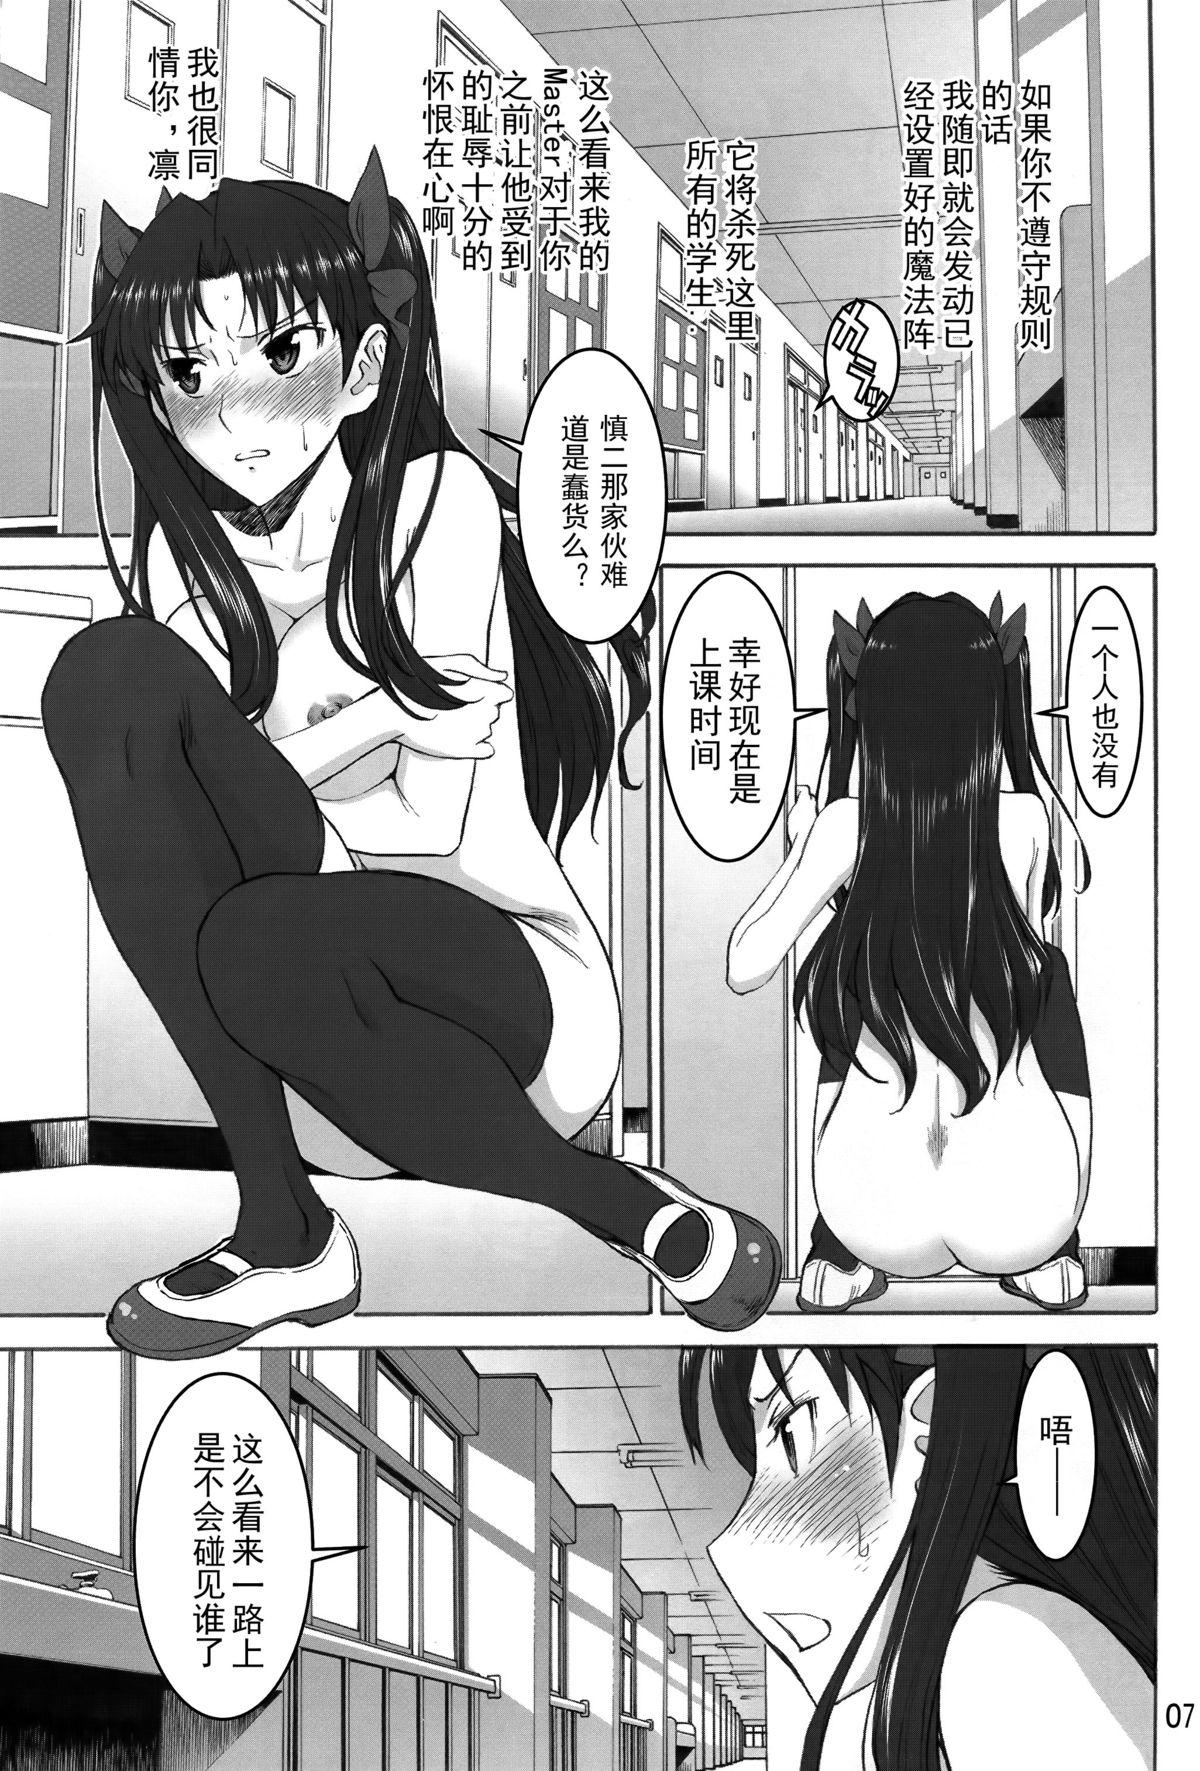 Swallowing Rinkan Mahou - Fate stay night Sex - Page 7